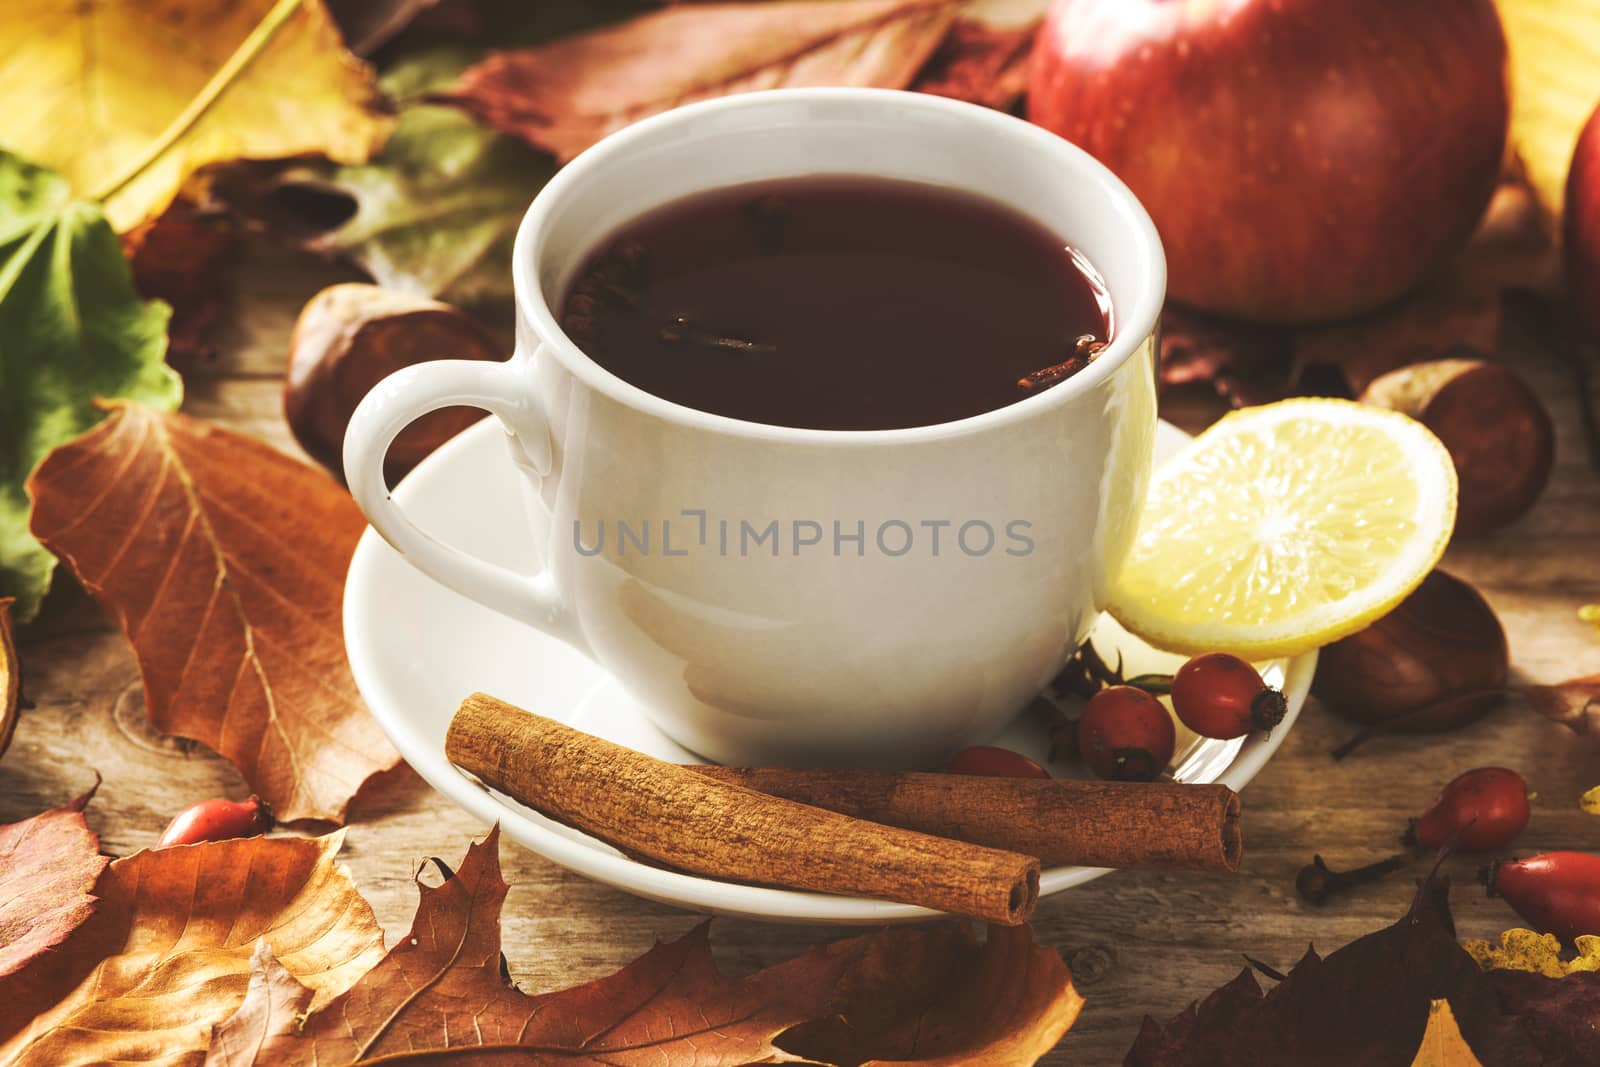 Concept of seasonal warm cup of tea with wild rose, spices, lemons and surrounded by autumn rustic decoration (vintage effect)